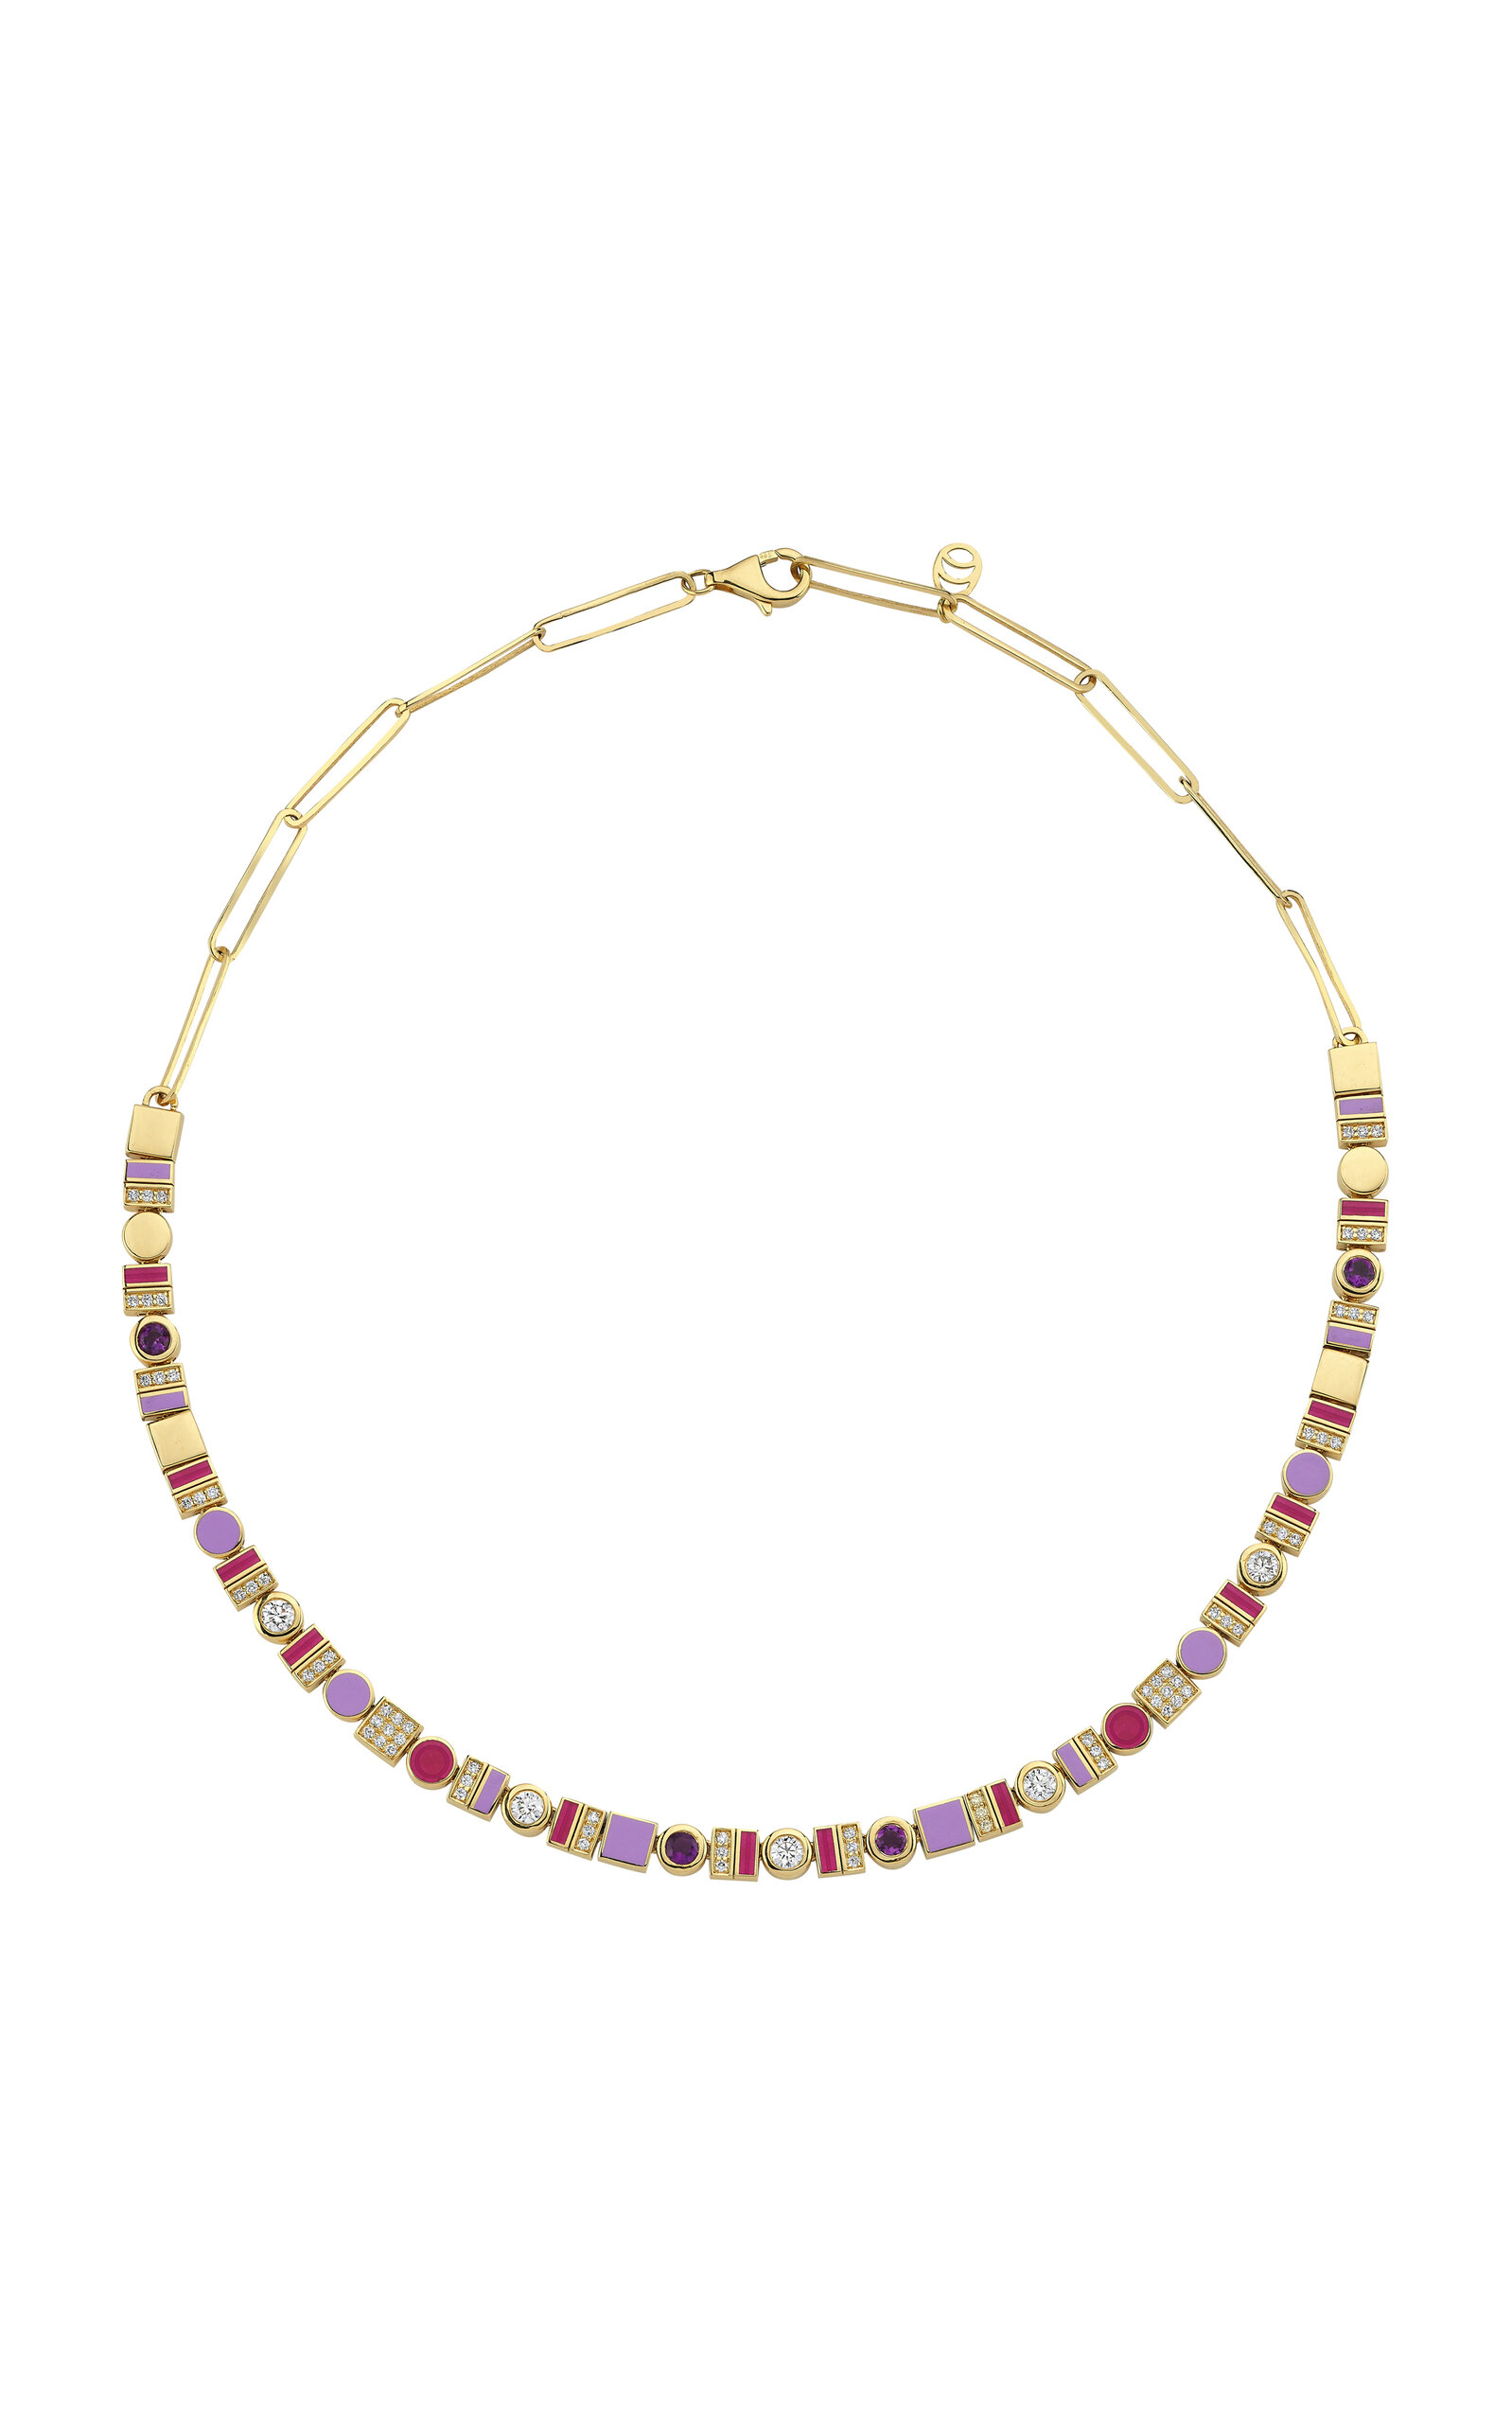 Charms Company Women's Les BonBons 14K Yellow Gold Enamel; Diamond and Amethyst Necklace